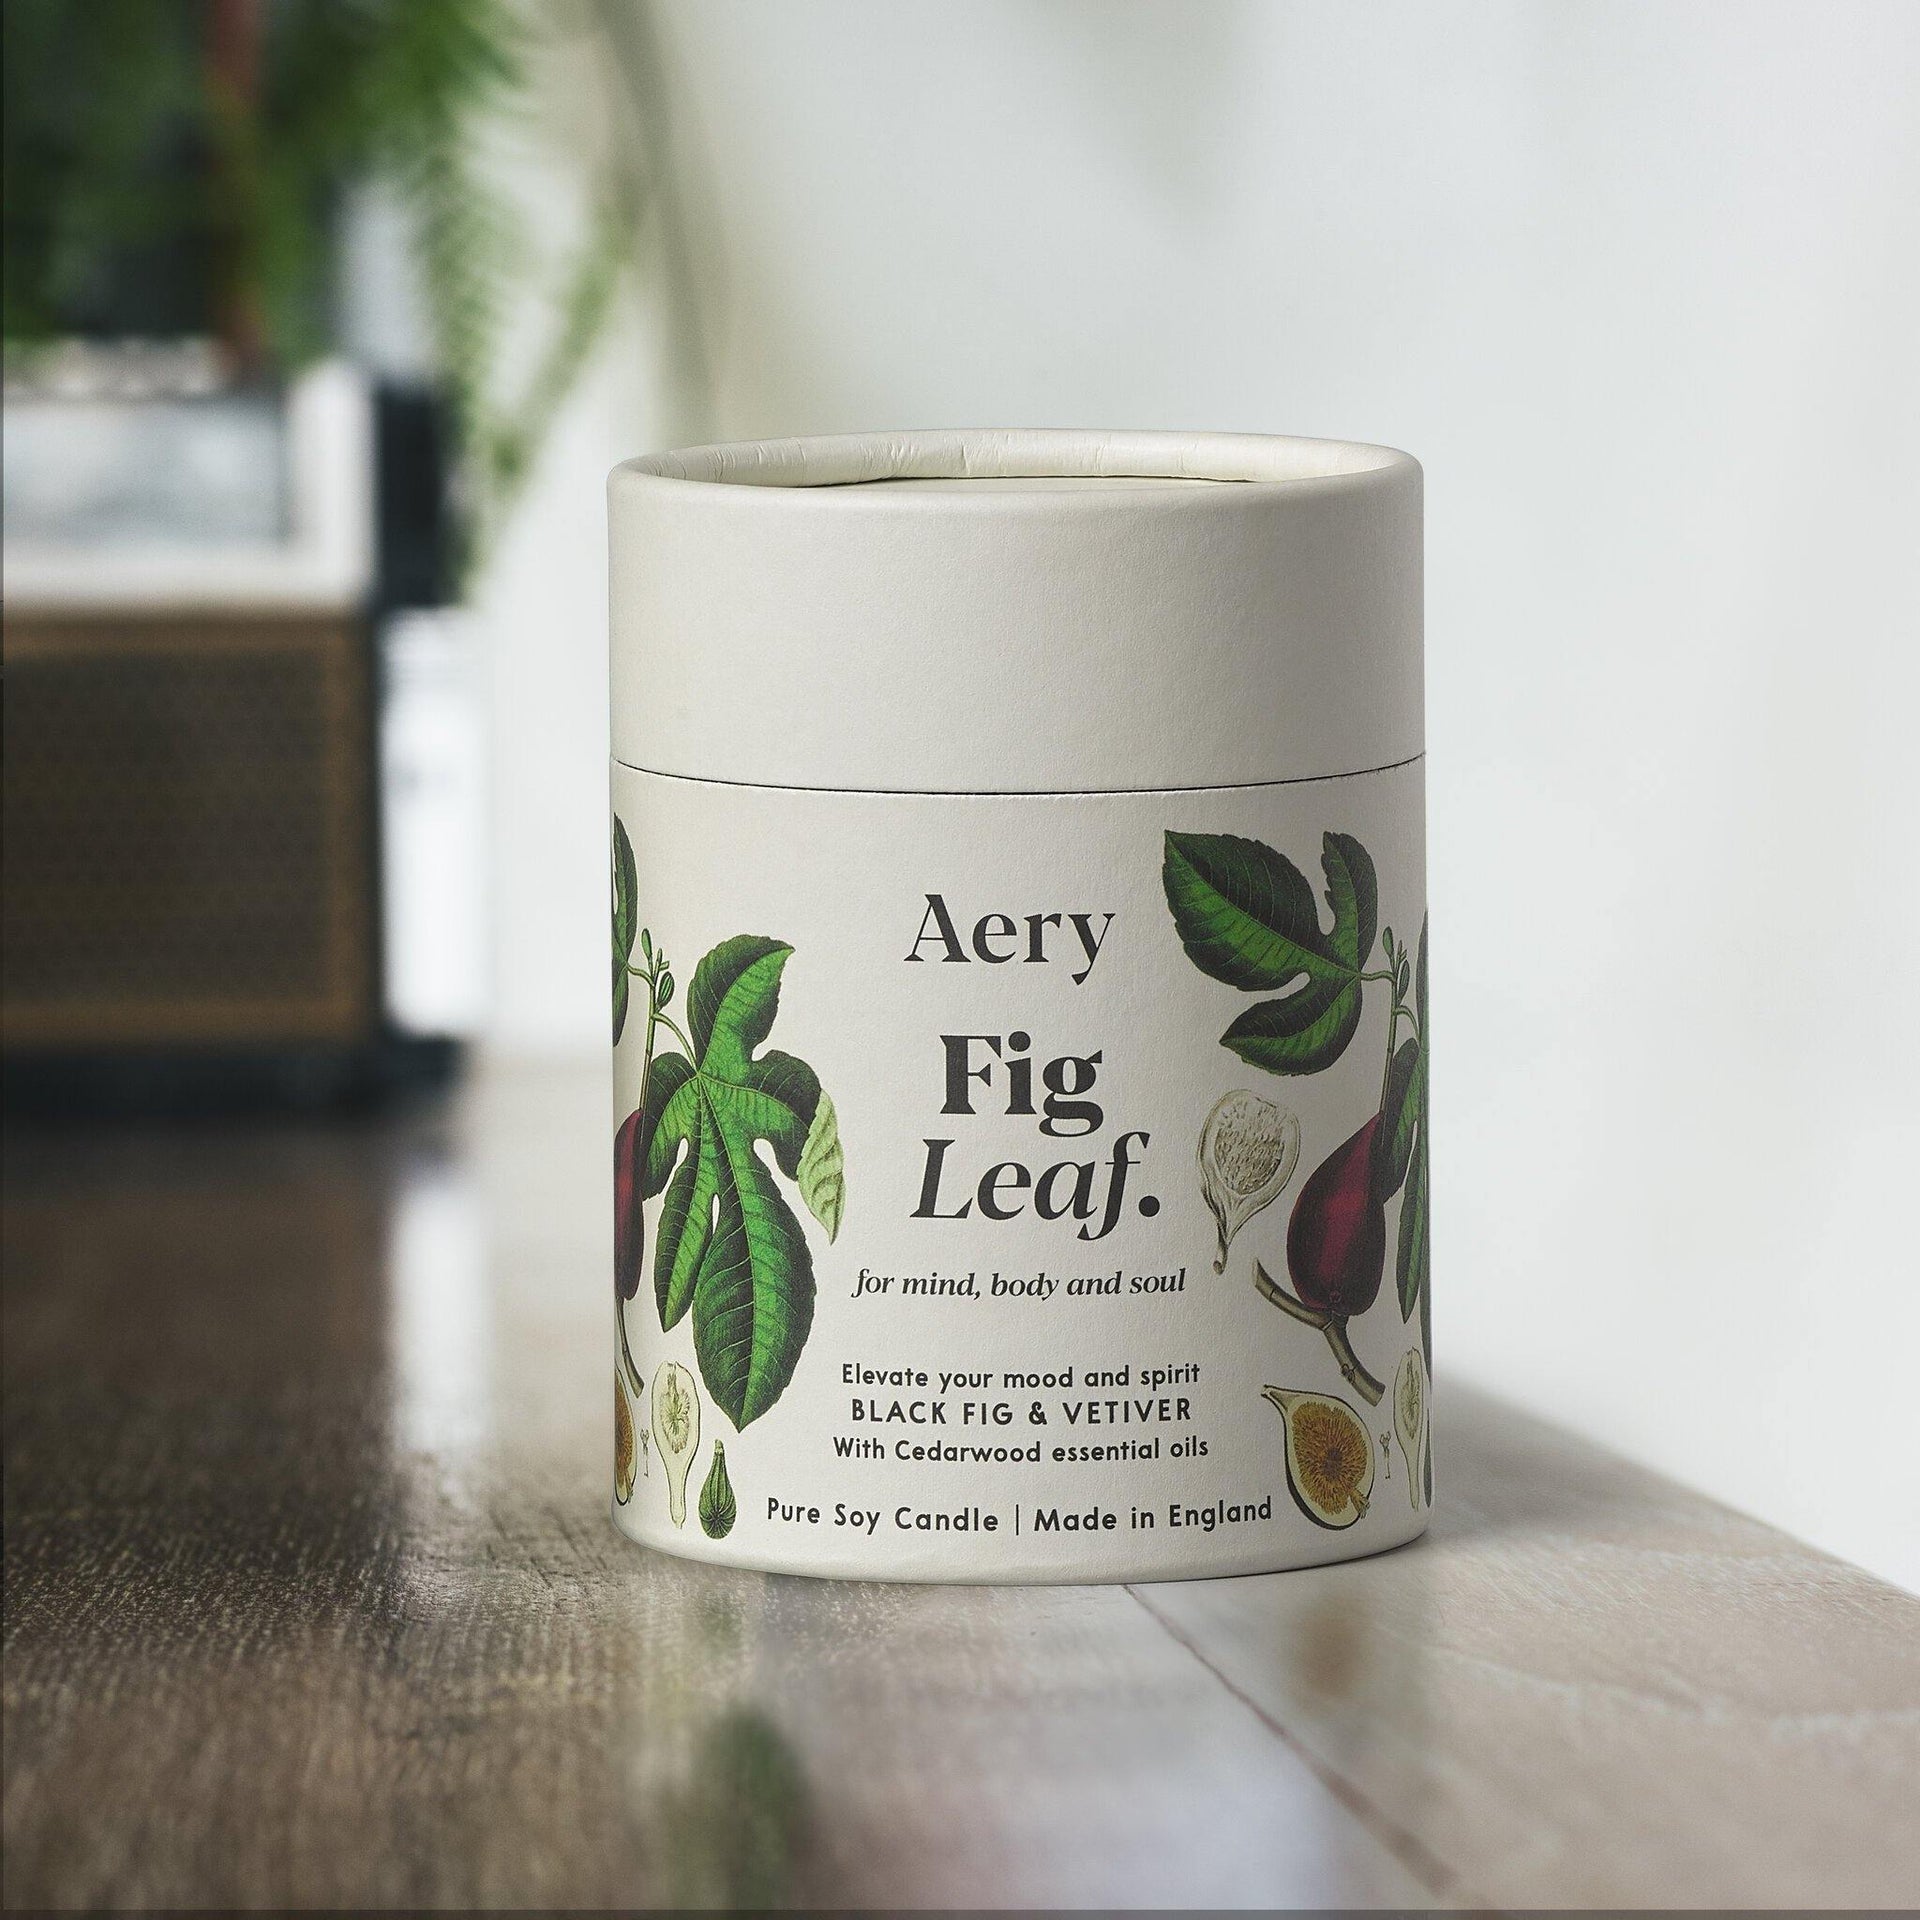 Aery Living Botanical 200g Soy Candle-Fig Leaf | Scented Candles | Candle Fragrances | Soy Candles | Newcastle Candles | Best Candles | Nice Candles | Gifts | Best Gifts | Wax Candles | Mothers Day Gifts | Christmas Gifts | Candles Australia | Candle Shop | Presents | Sydney Candles | Brisbane Candles | Townsville Candles | Melbourne Candles | Perth Candles | Soy Wax | Accepts Bitcoin | Candles Online | Accepts Crypto currency | Upcycle Studio